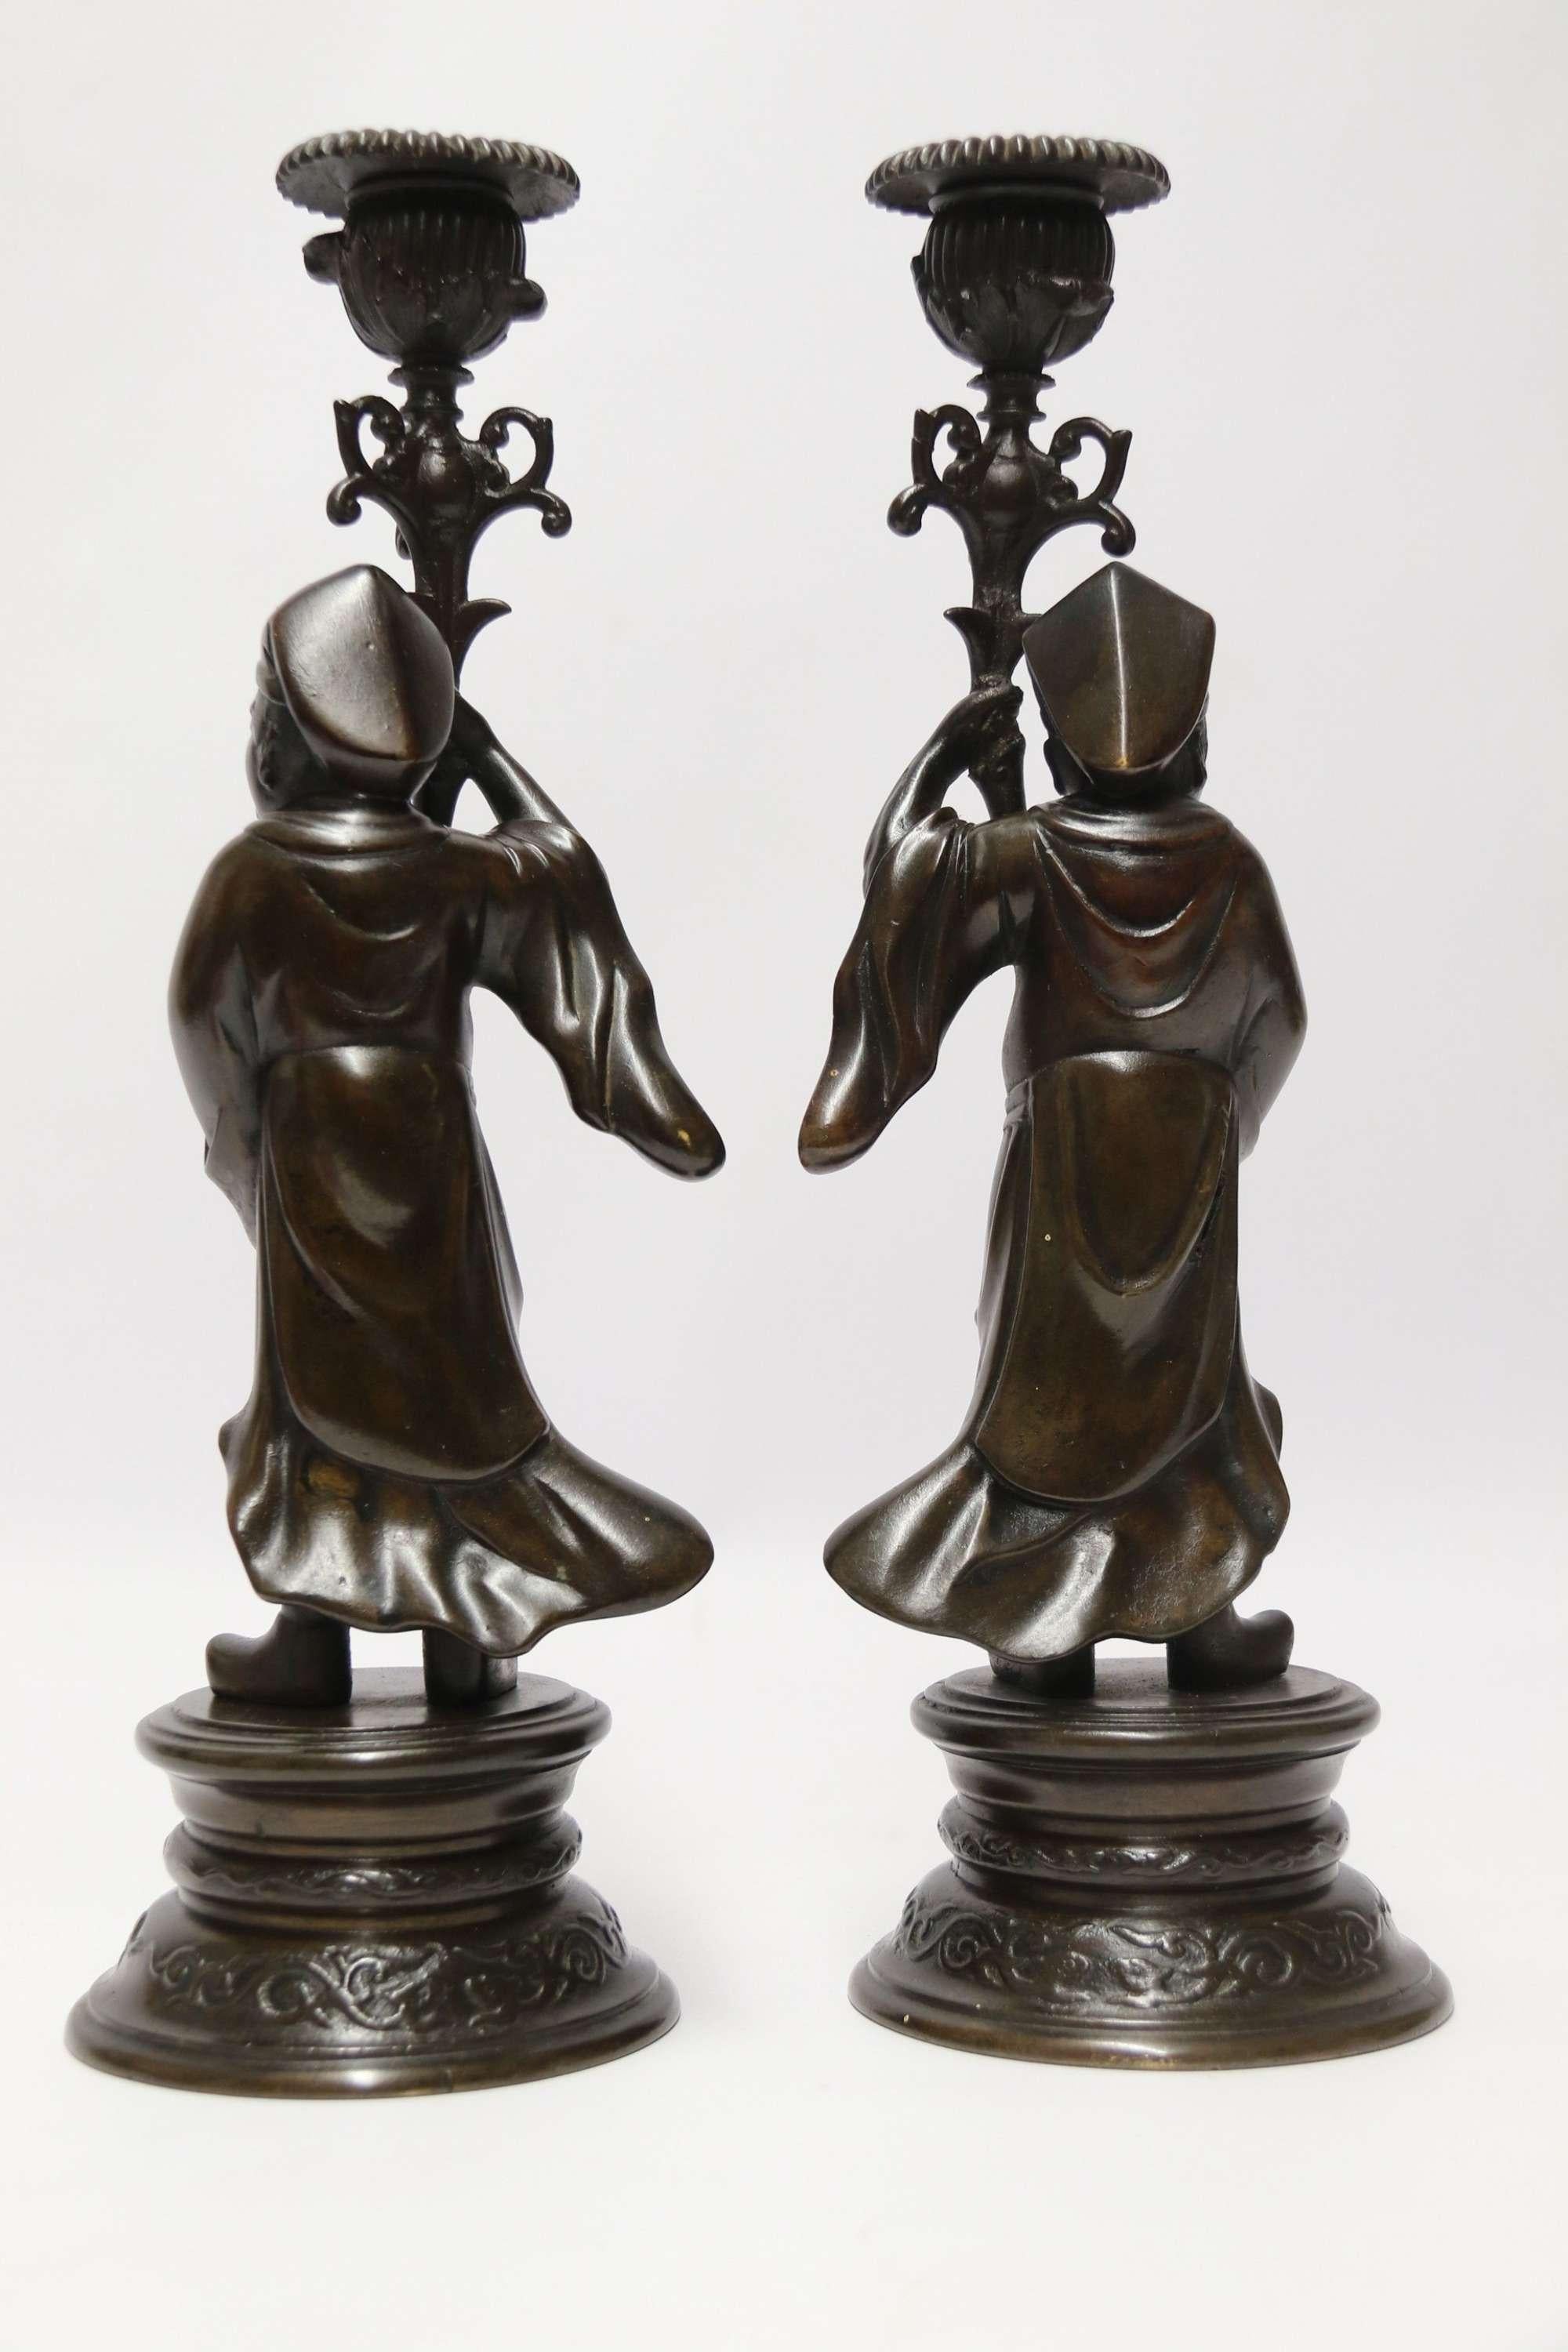 A Good Pair of 19th C French Bronze Candlesticks in the form of Chinese Figures

A most unusual good quality French bronze candlesticks in the form of 18th-century Chinese male figures dressed in traditional costume and holding up torchieres which